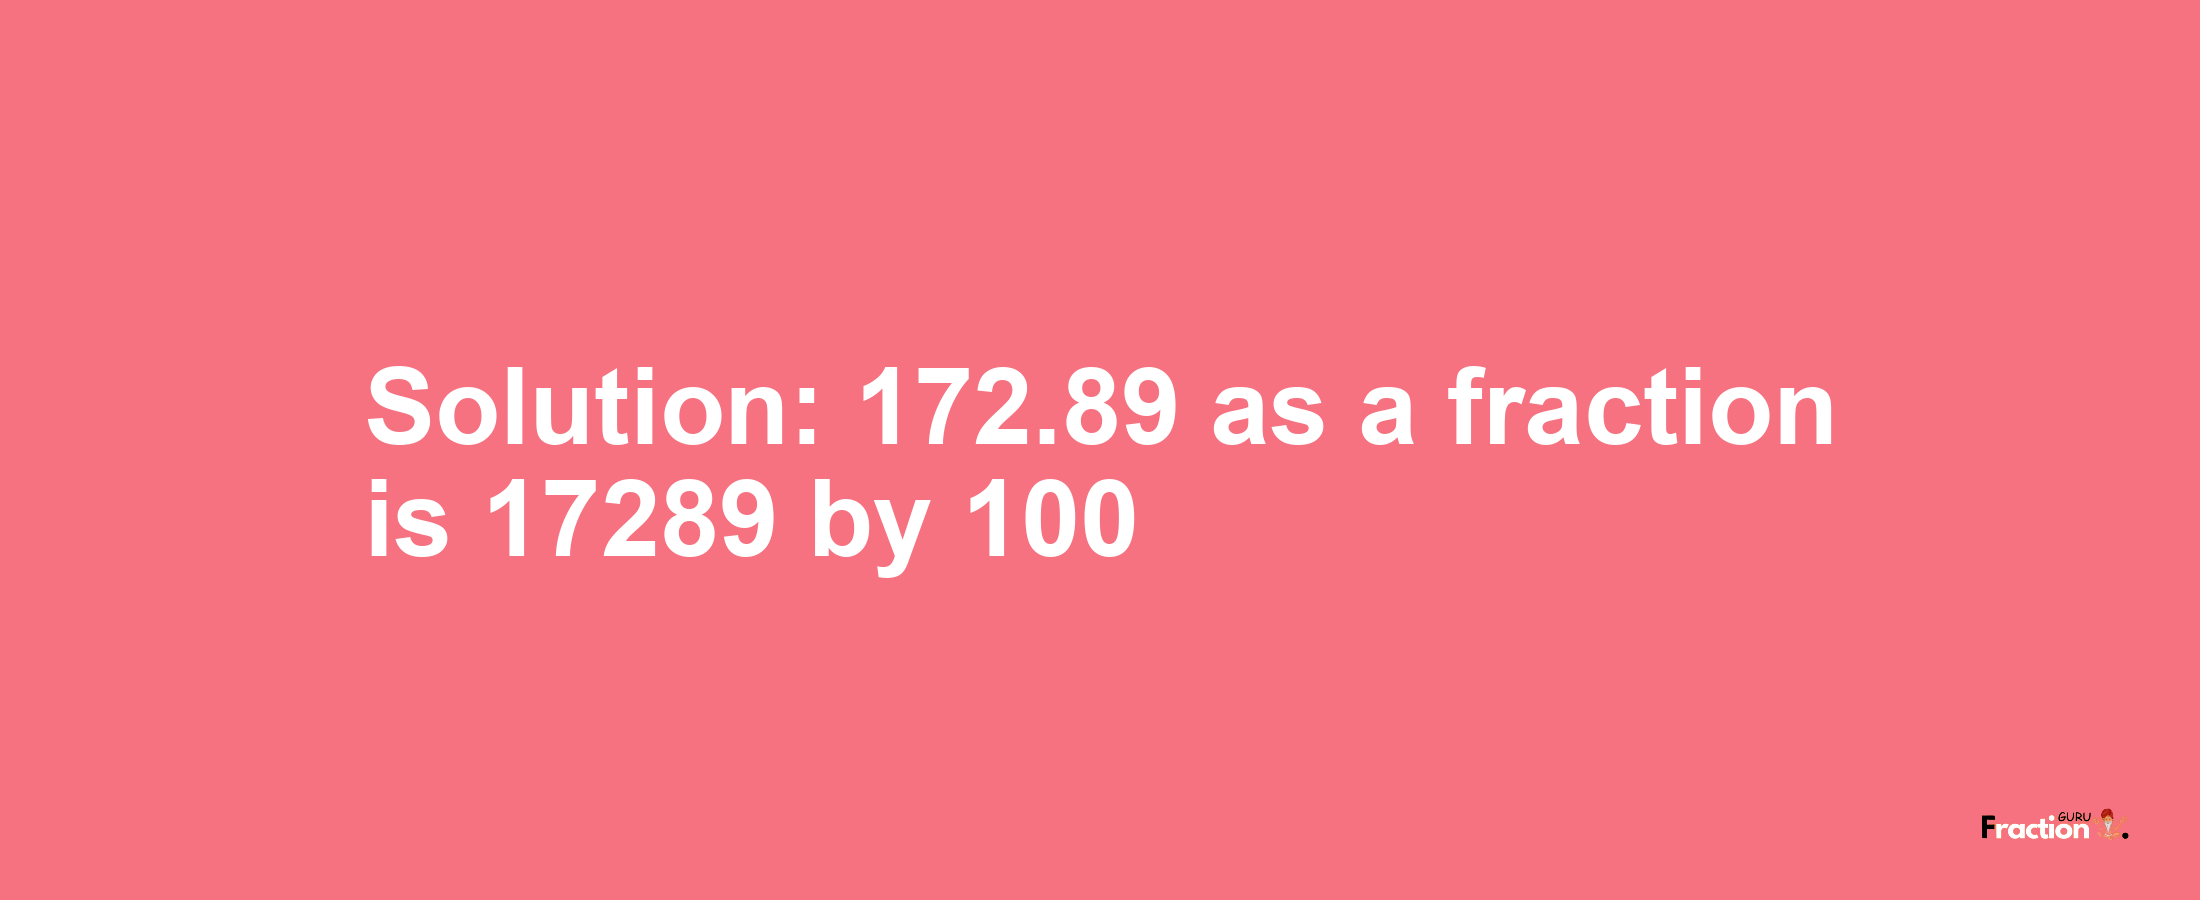 Solution:172.89 as a fraction is 17289/100